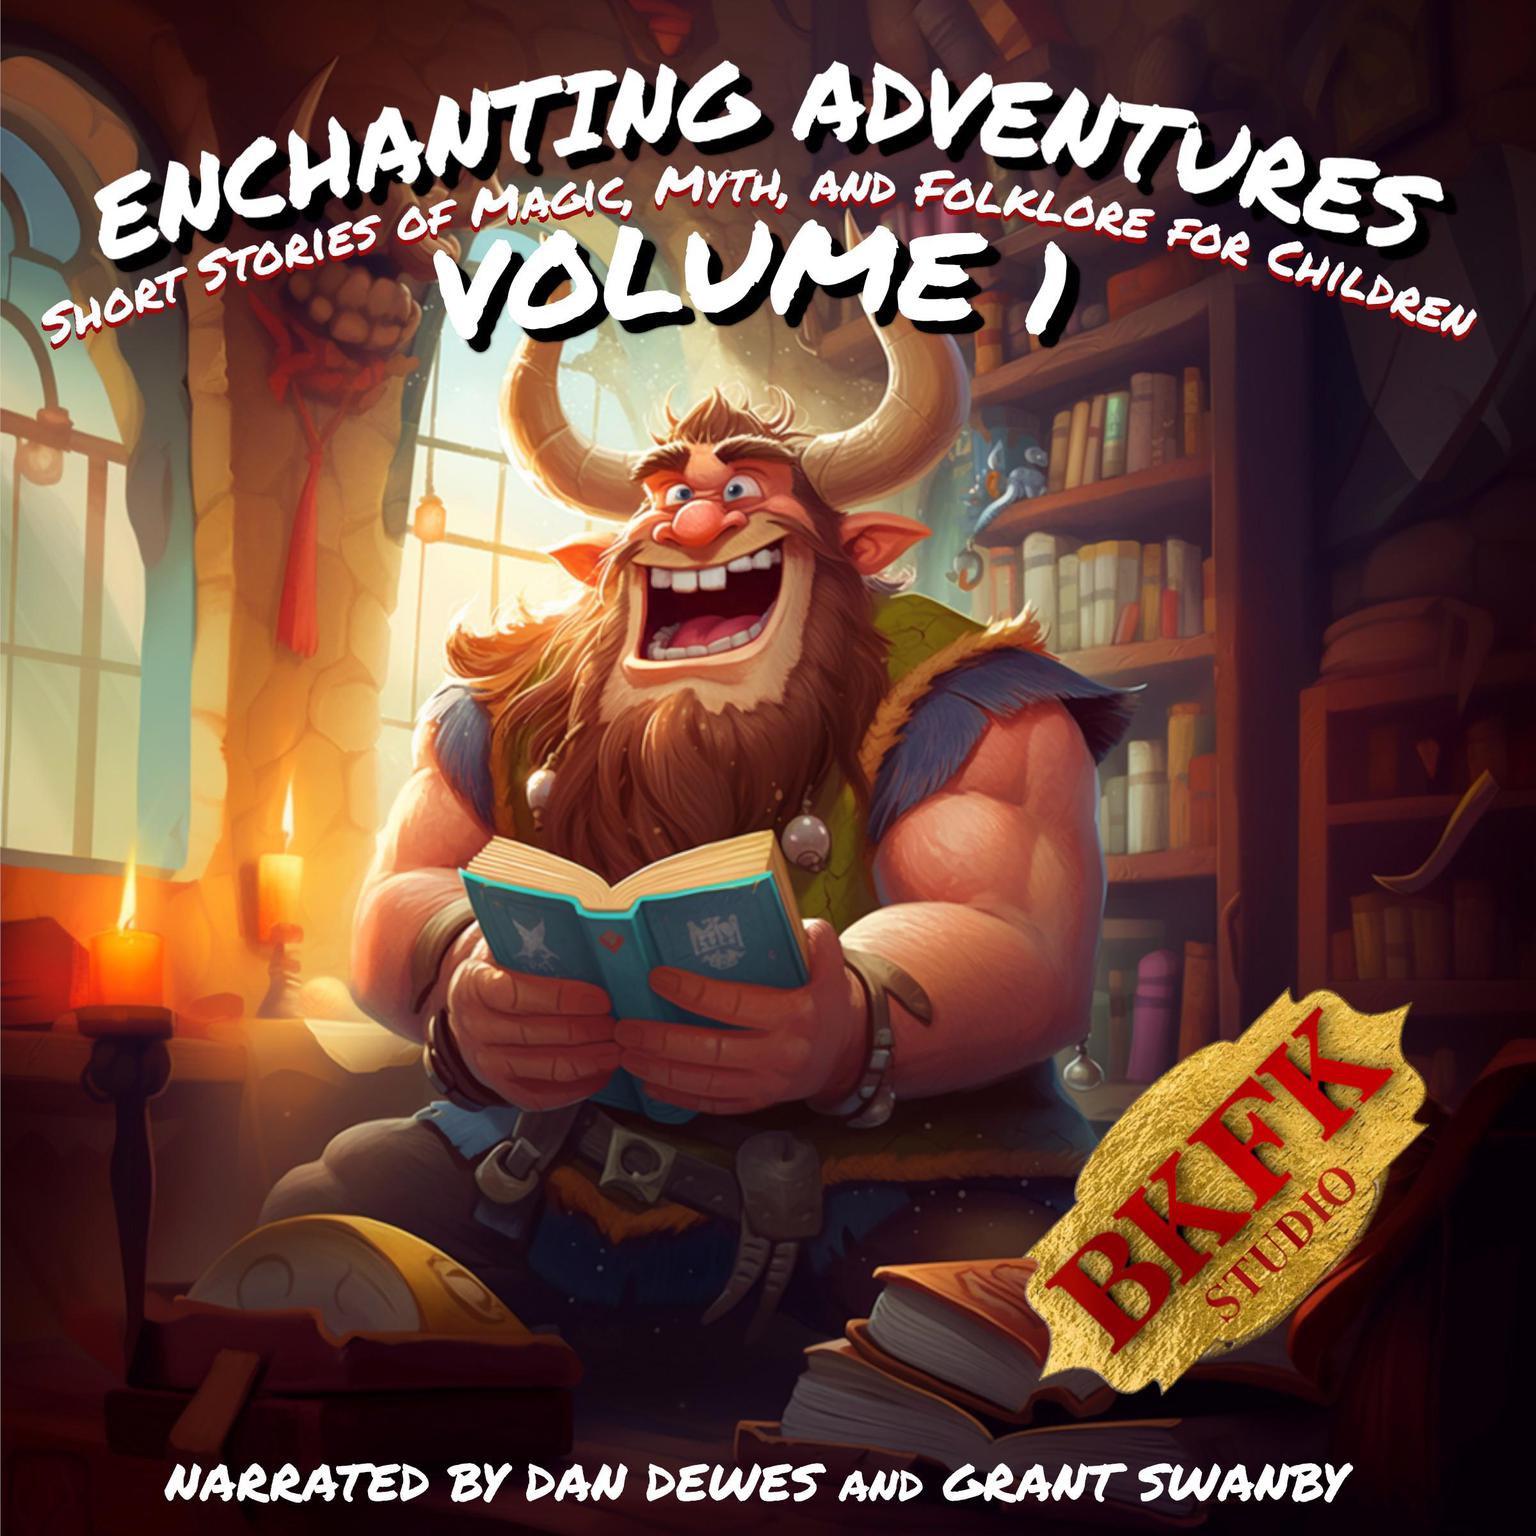 Enchanting Adventures: Short Stories of Magic, Myth, and Folklore for Children - Volume 1 Audiobook, by BKFK Studio